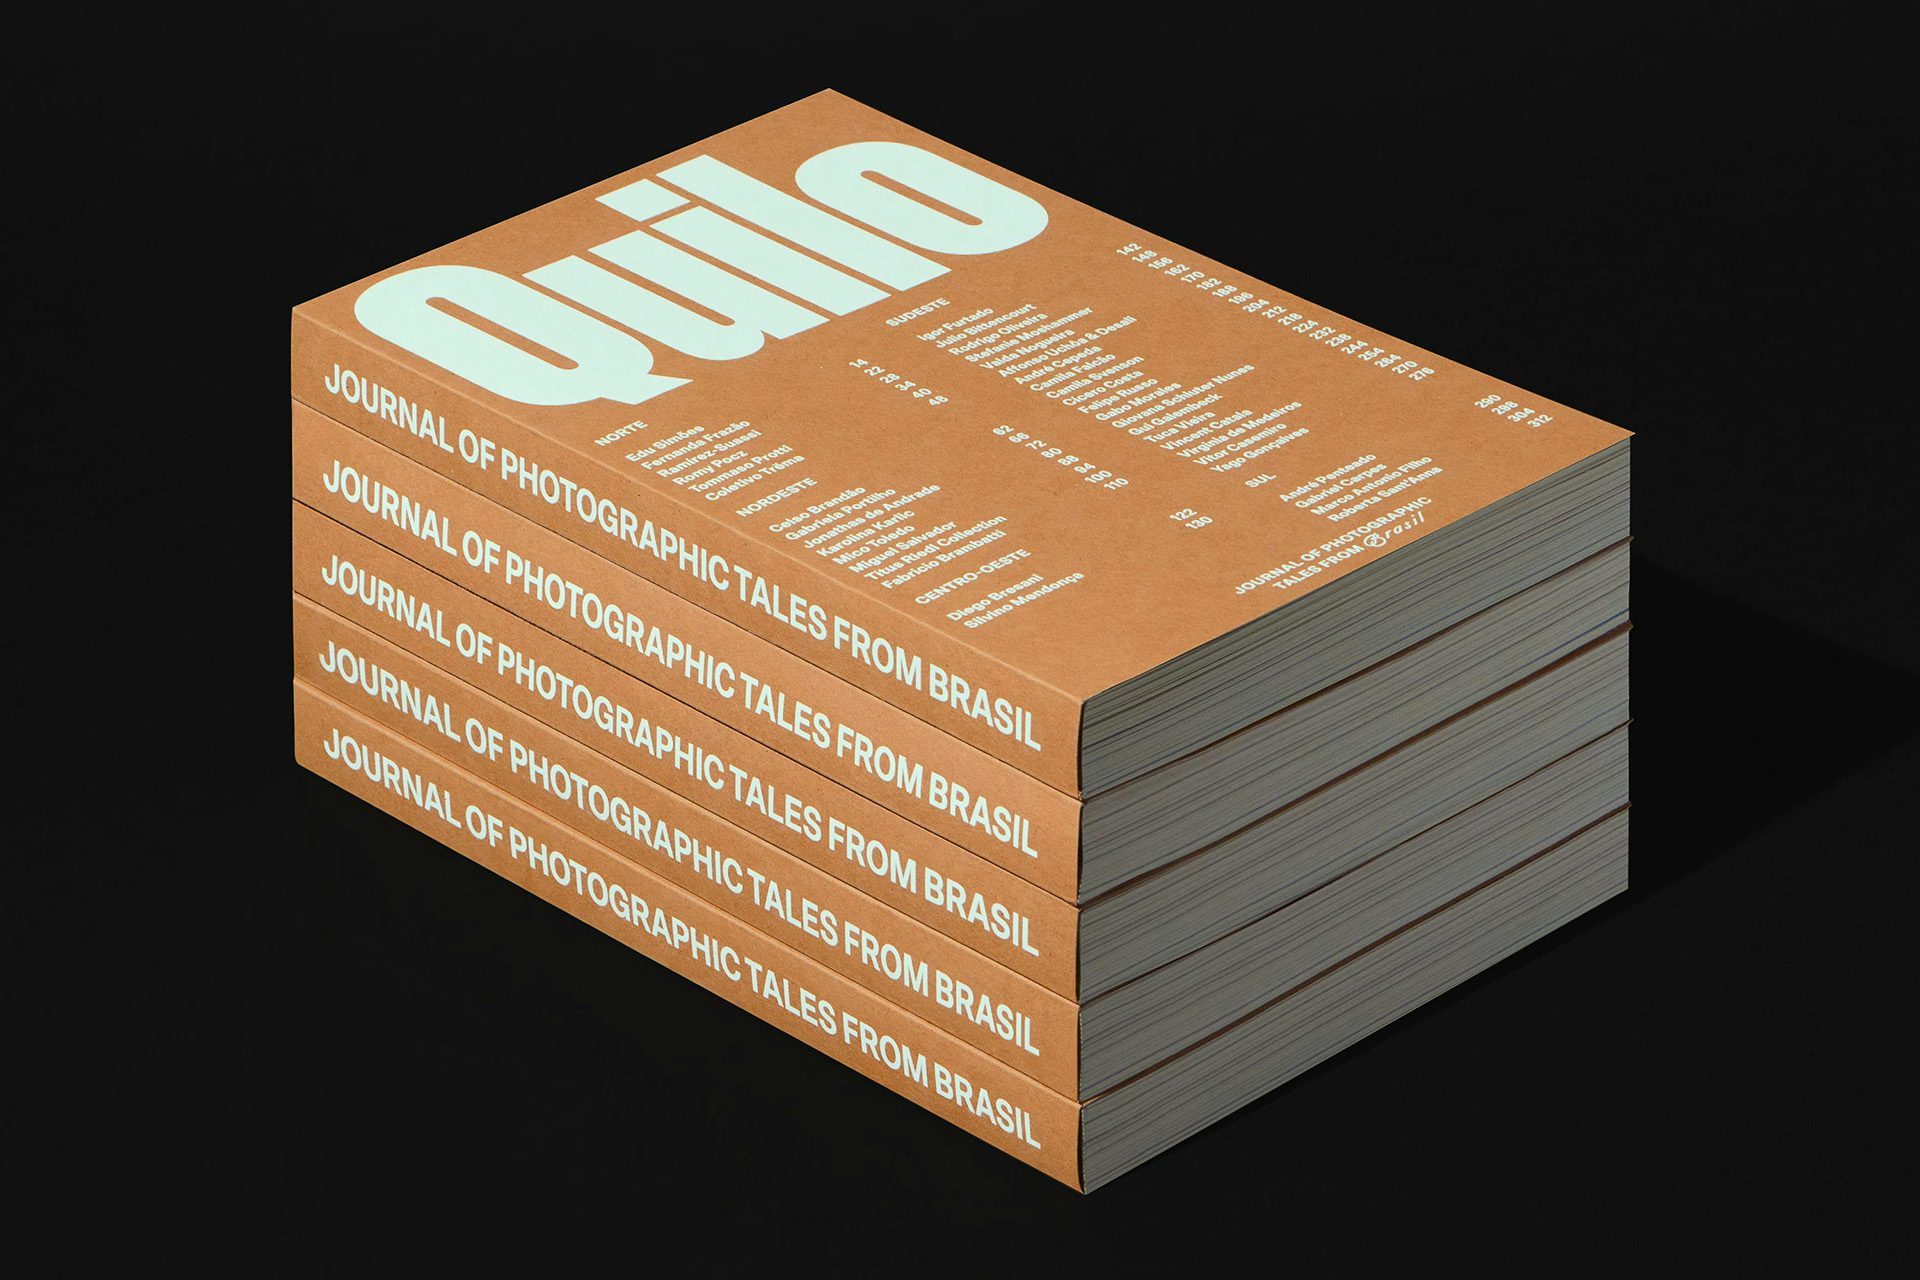 Photograph shows a stack of Quilo magazine with a orange-brown cover